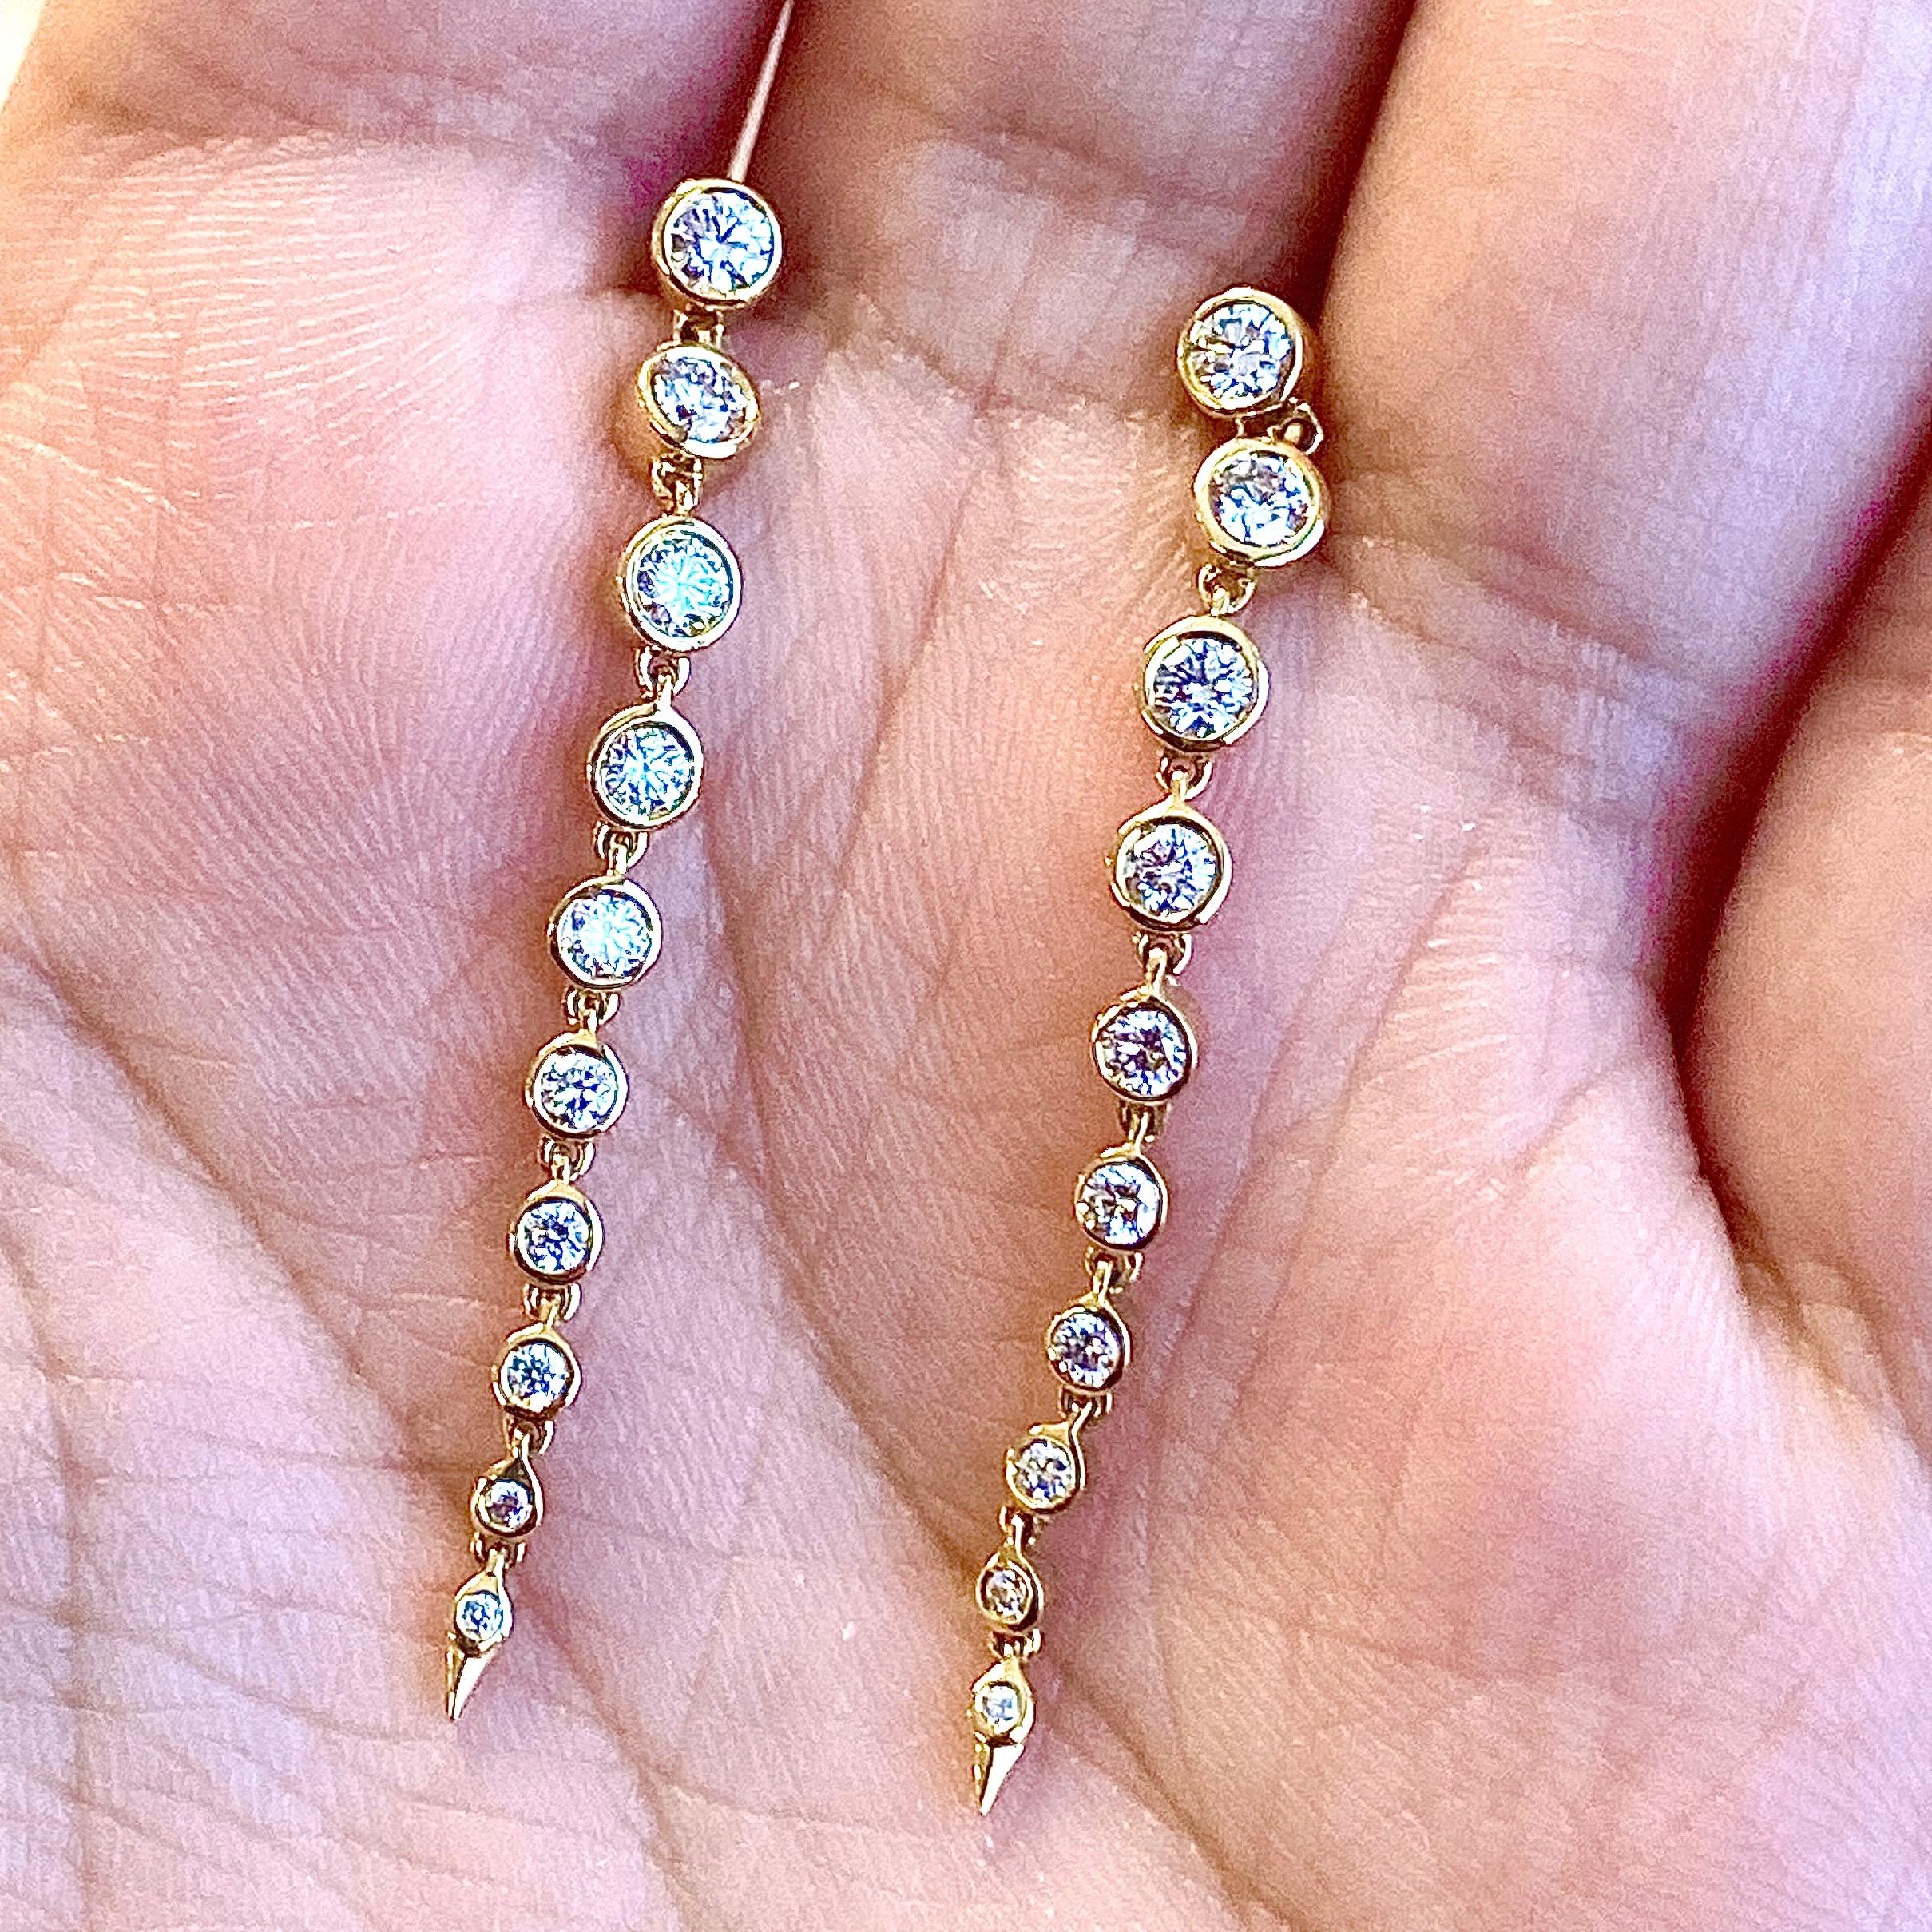 Created in 18kyg 
Diamonds 0.70 ct approxx

These exquisite Candy Blue Topaz and Moon Quartz Earrings are a celestial delight, crafted with care and attention to detail from luxurious 18kyg gold. Boasting 0.70 ct of sparkling diamonds, these